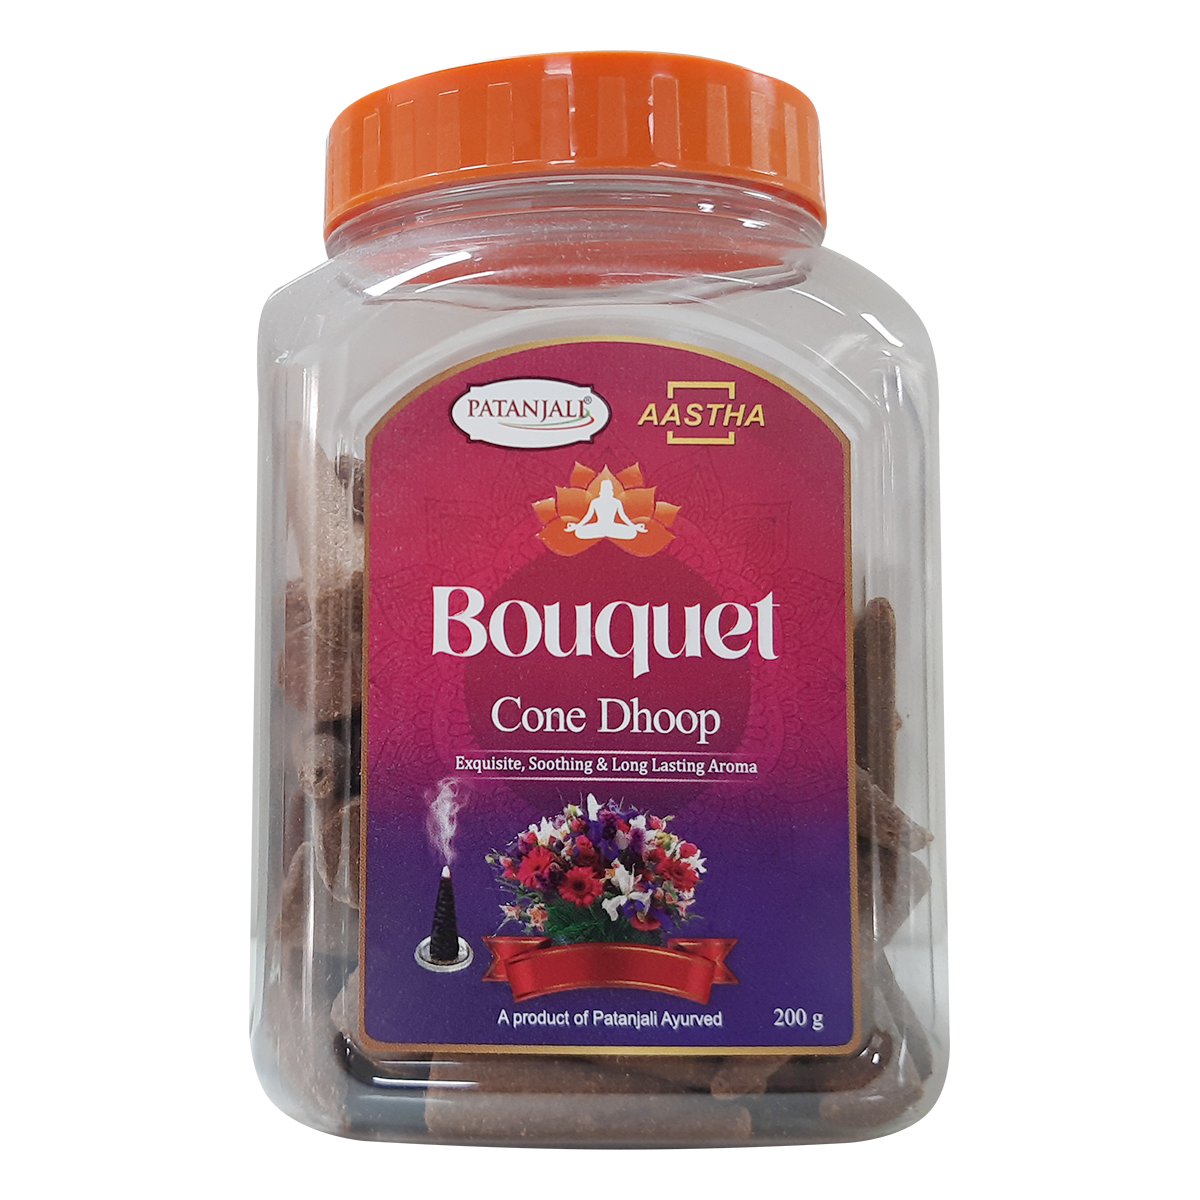 Patanjali Aastha Bouquet Cone Dhoop